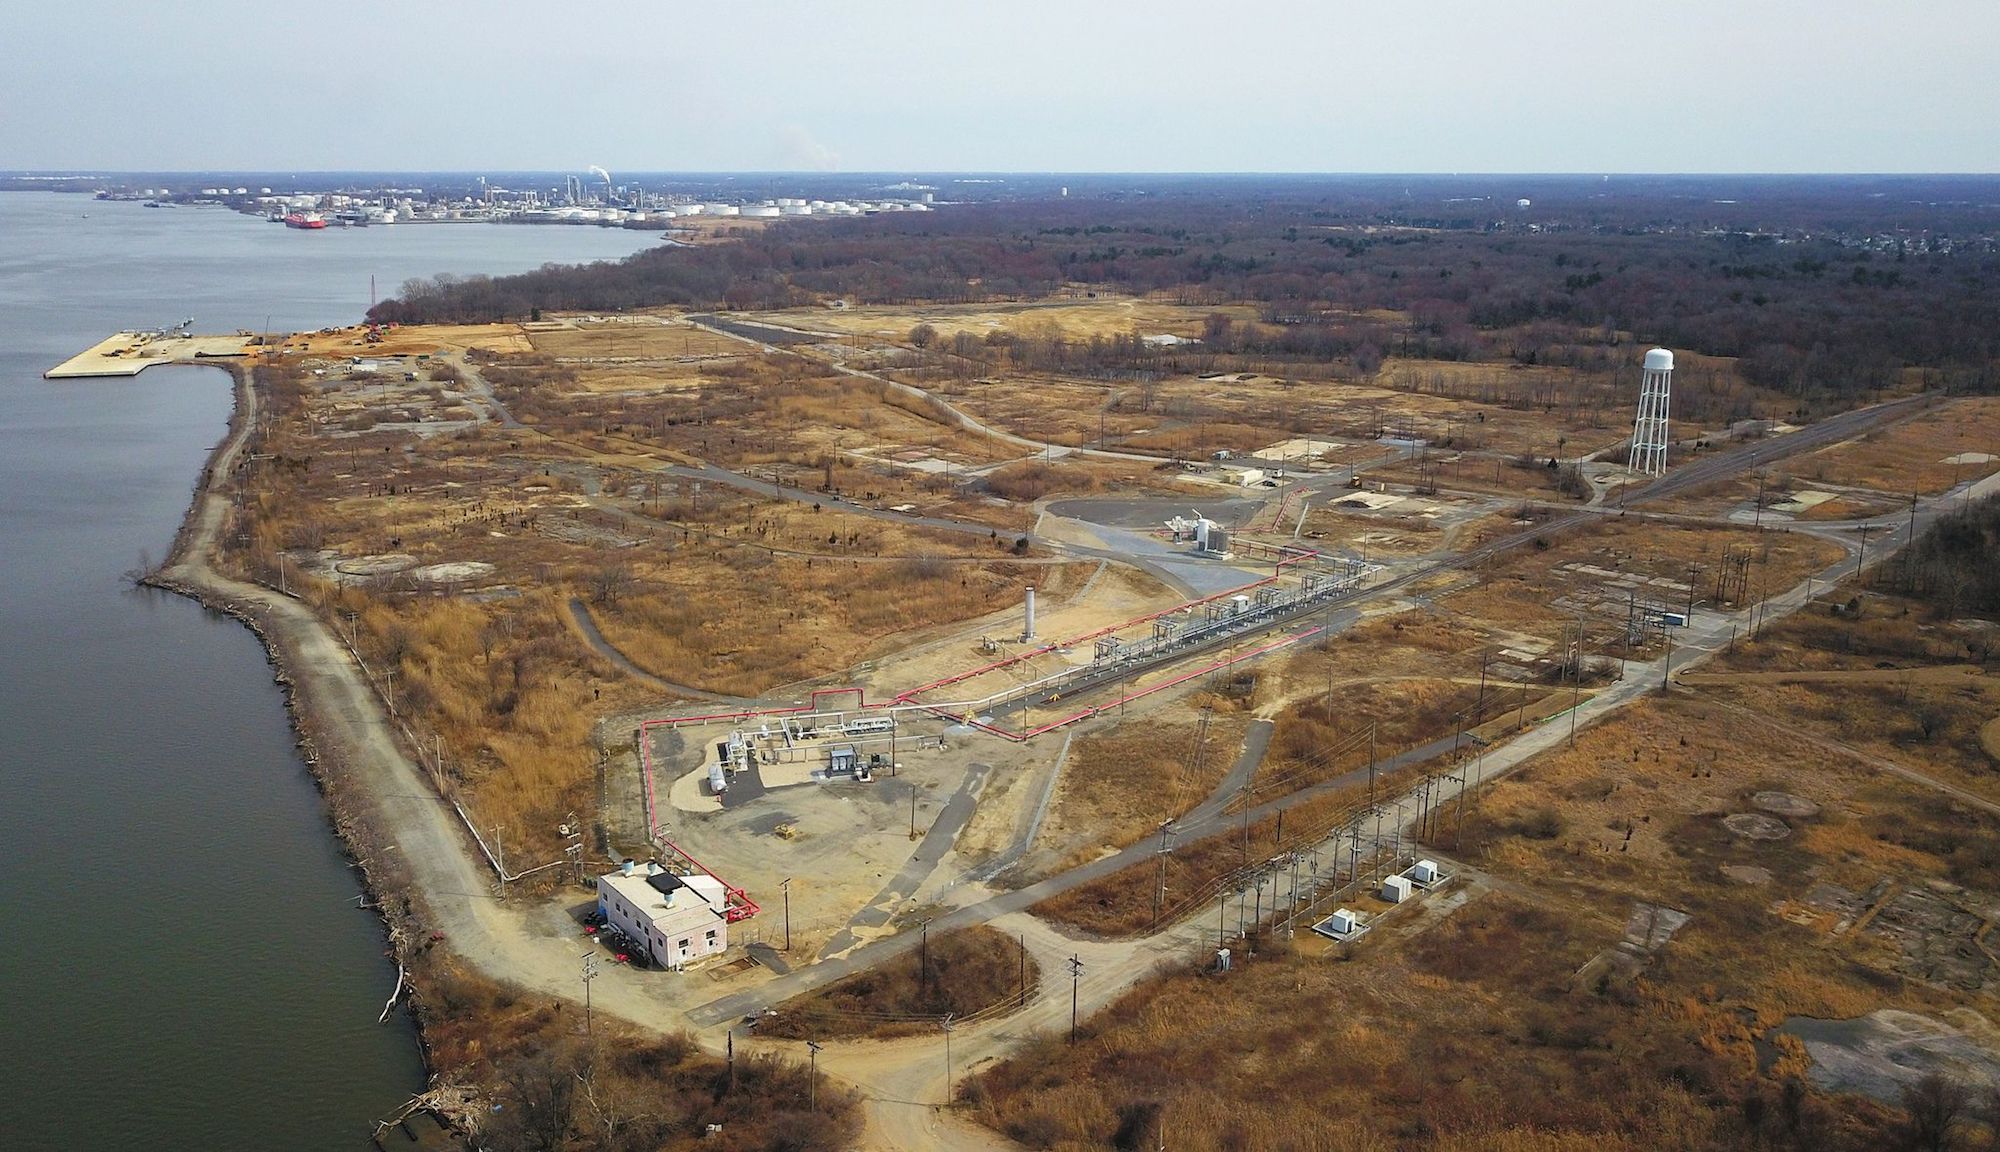 an aerial view of a mostly empty lot surrounded by brown landscape